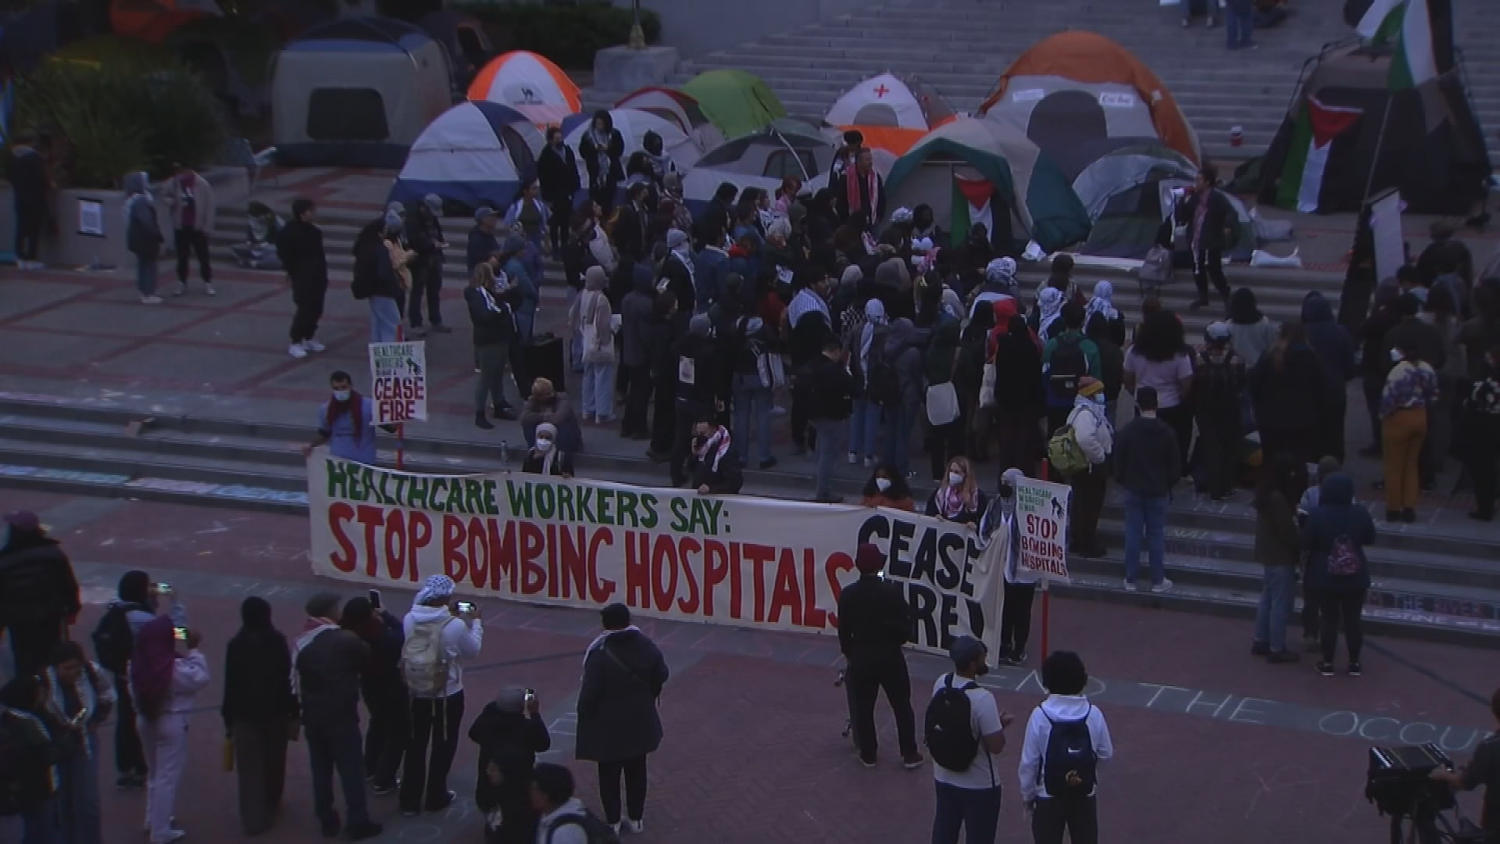 Pro-Palestinian protest grows at UC Berkeley campus